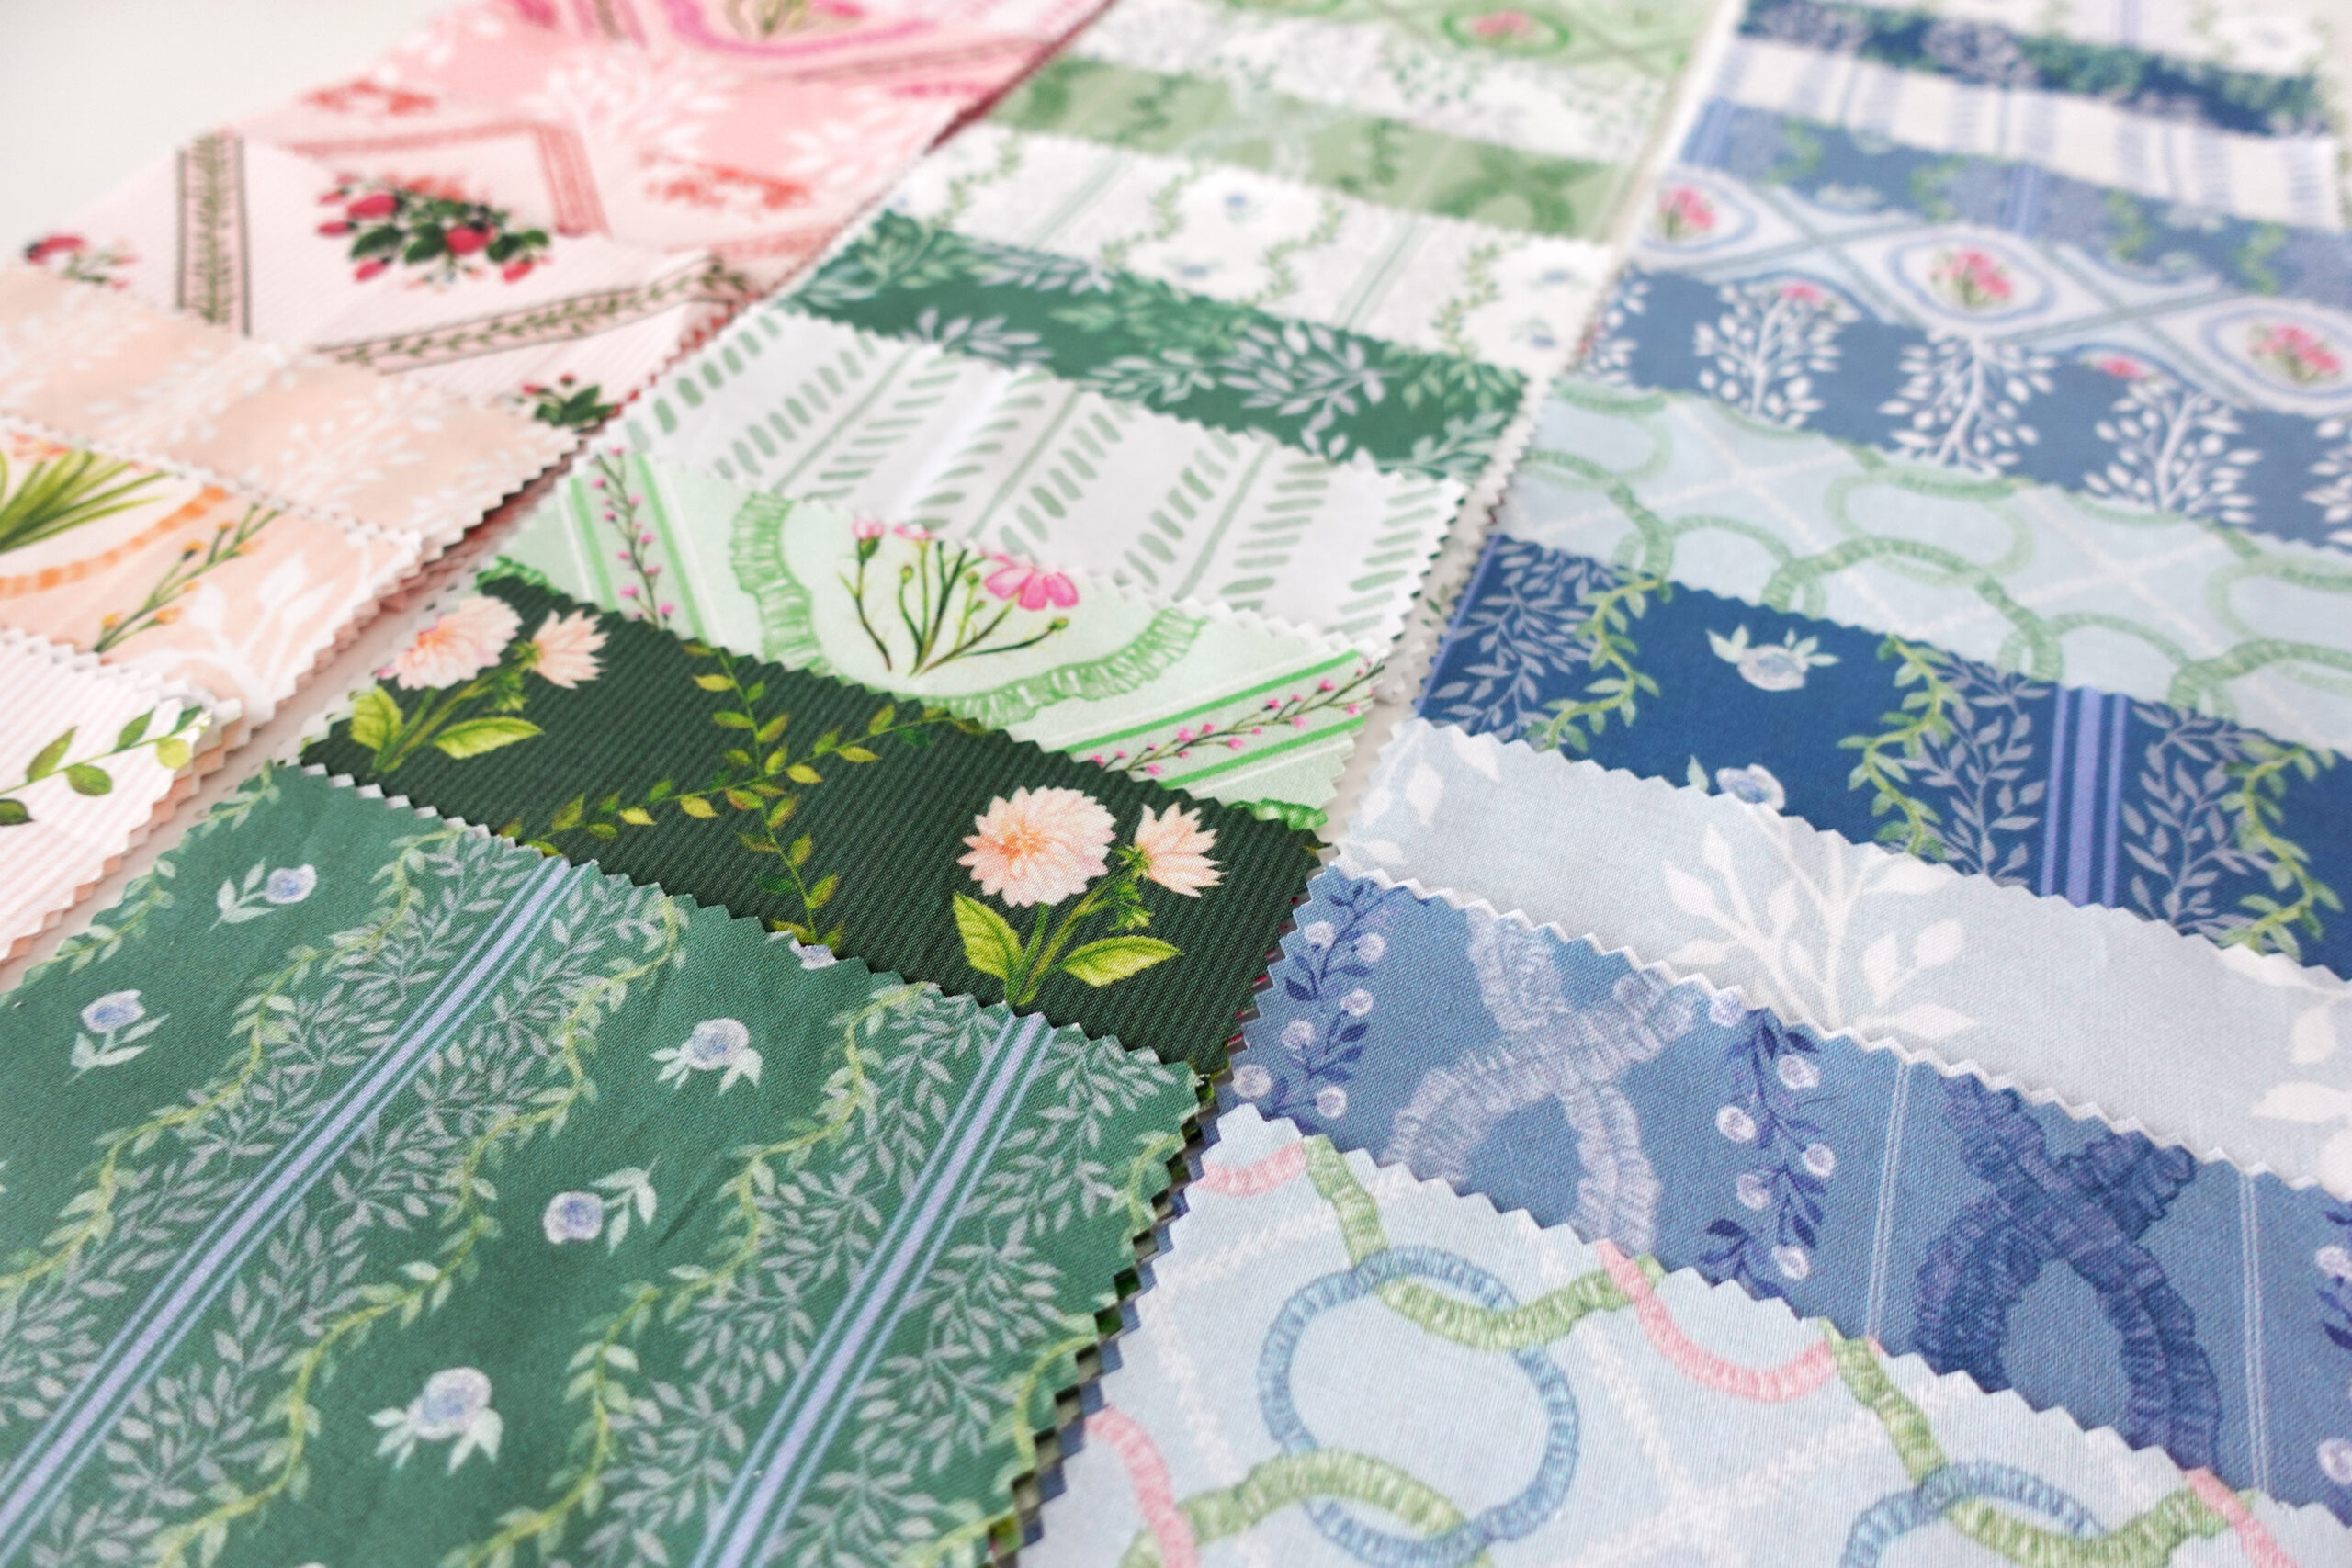 Textile Designs by Joanna Baker